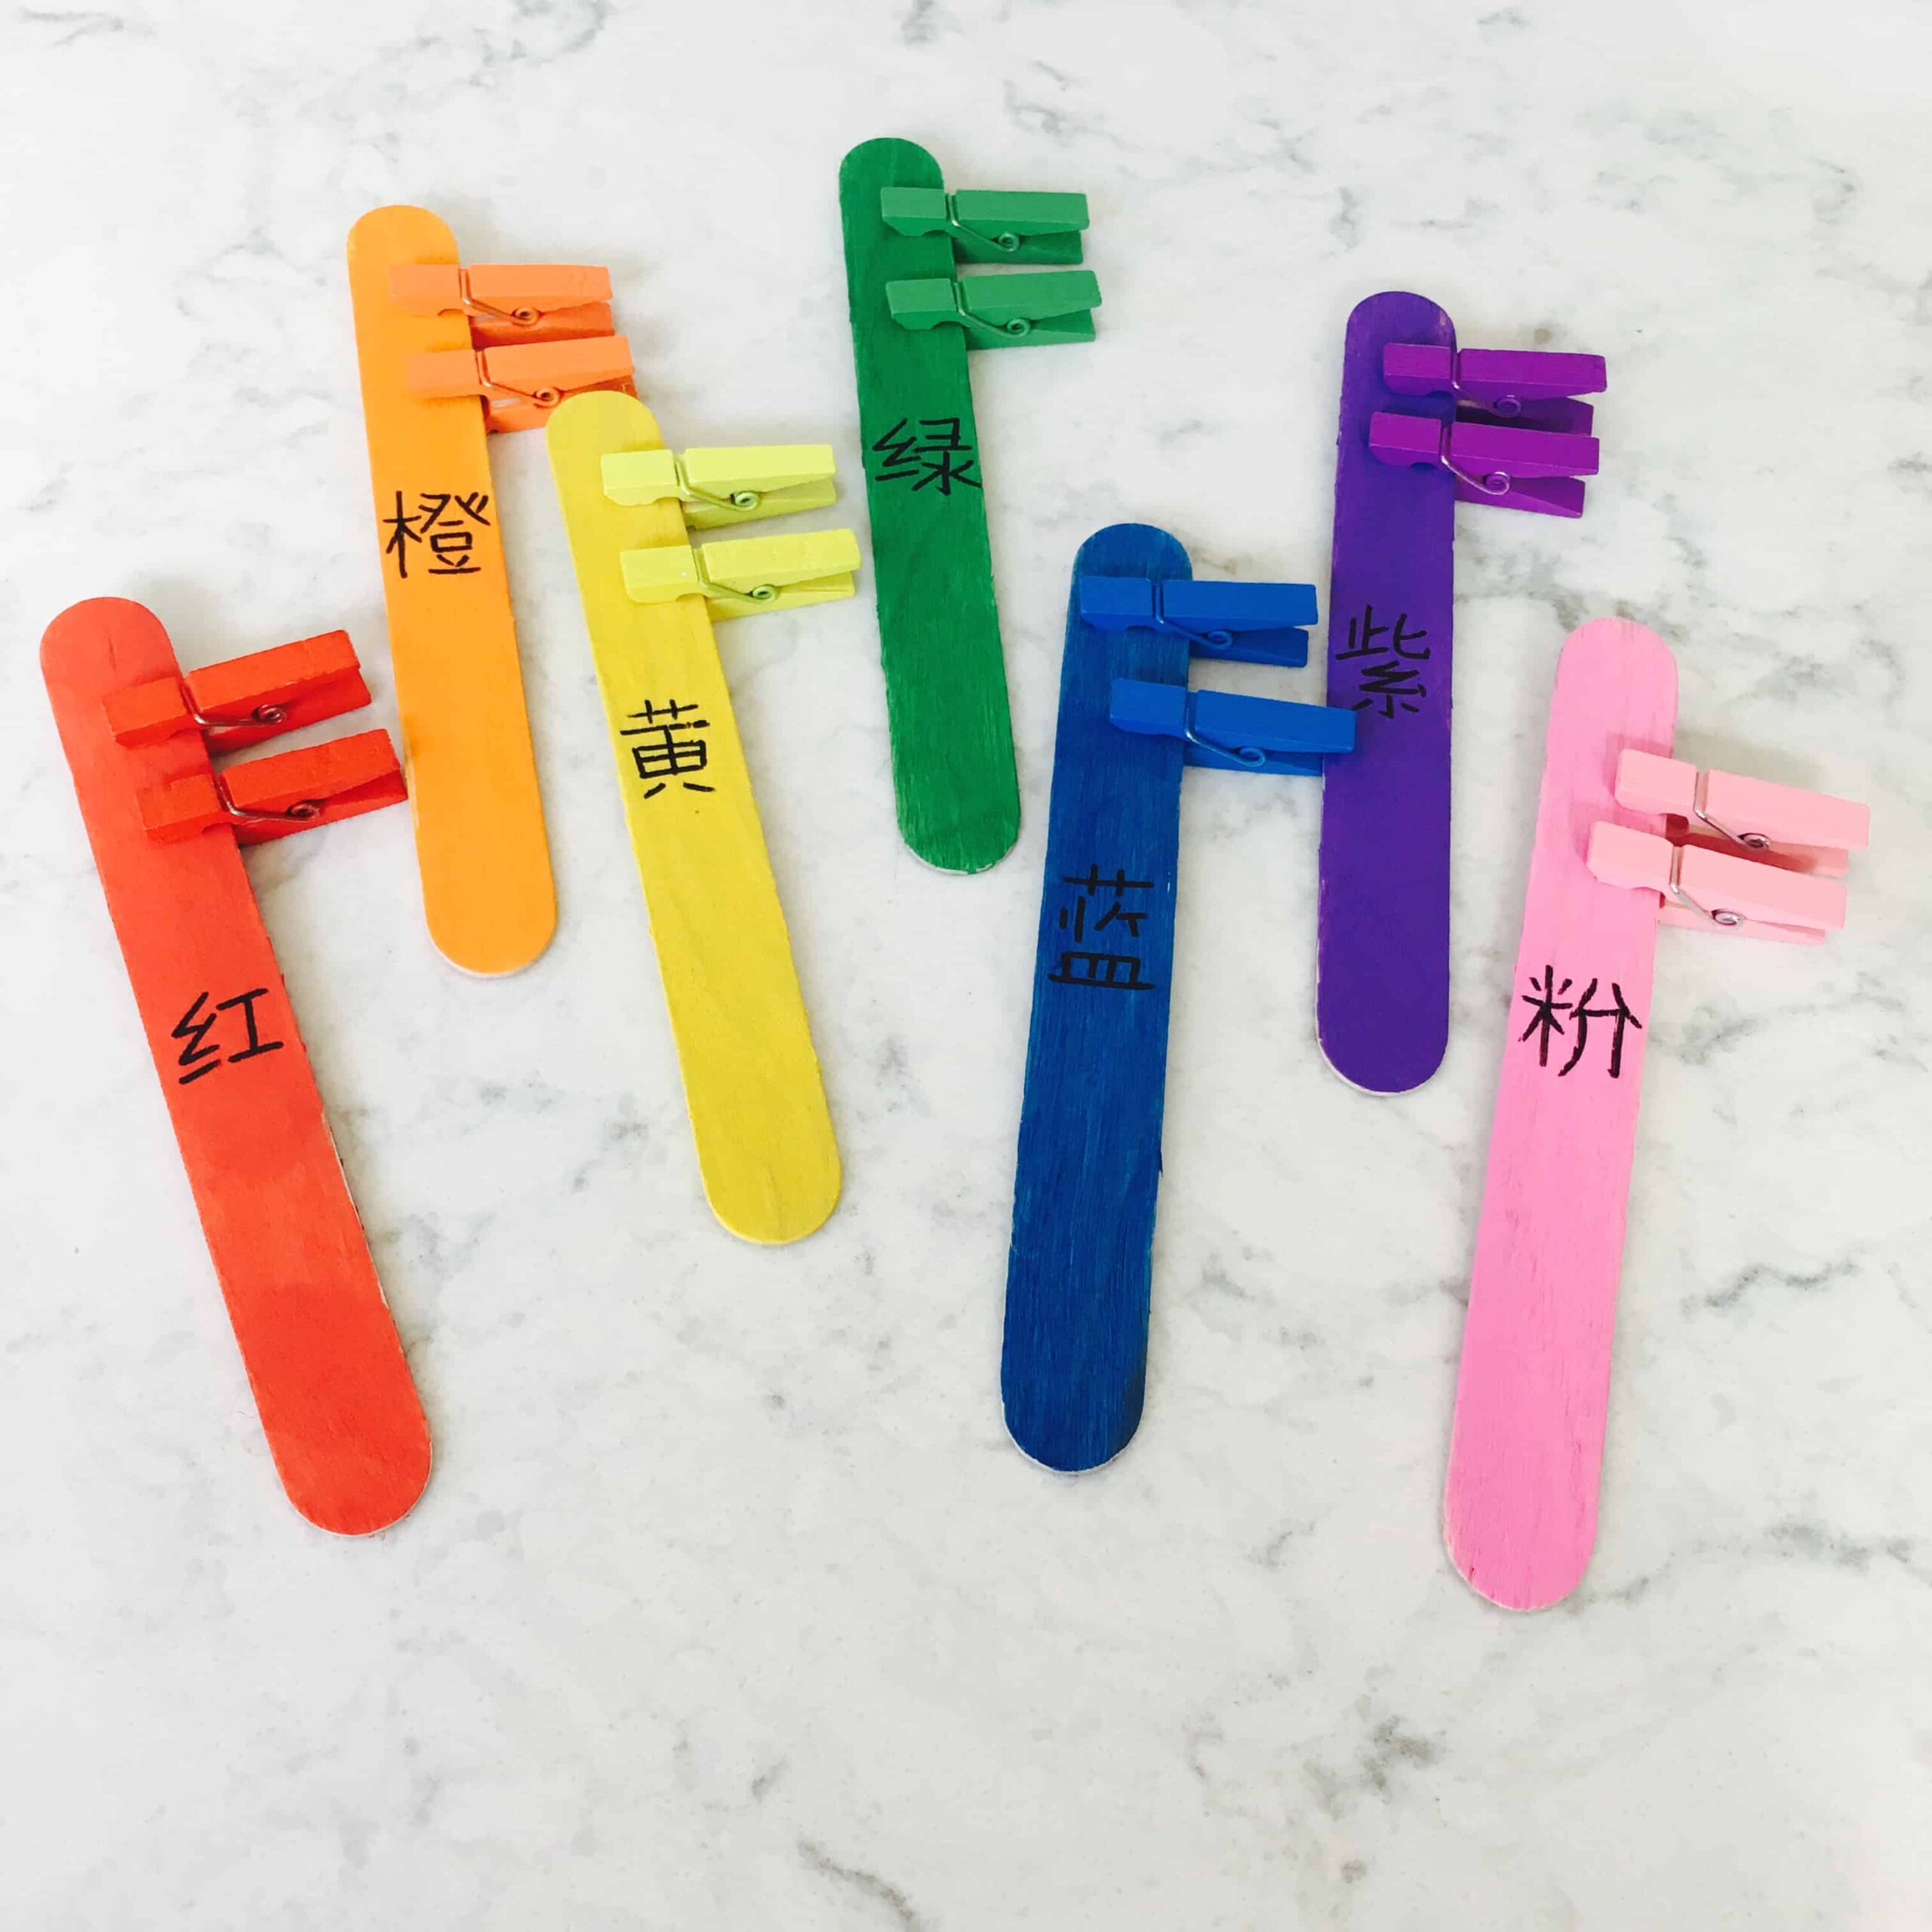 Peg and Stick Color Match Activity for Toddlers